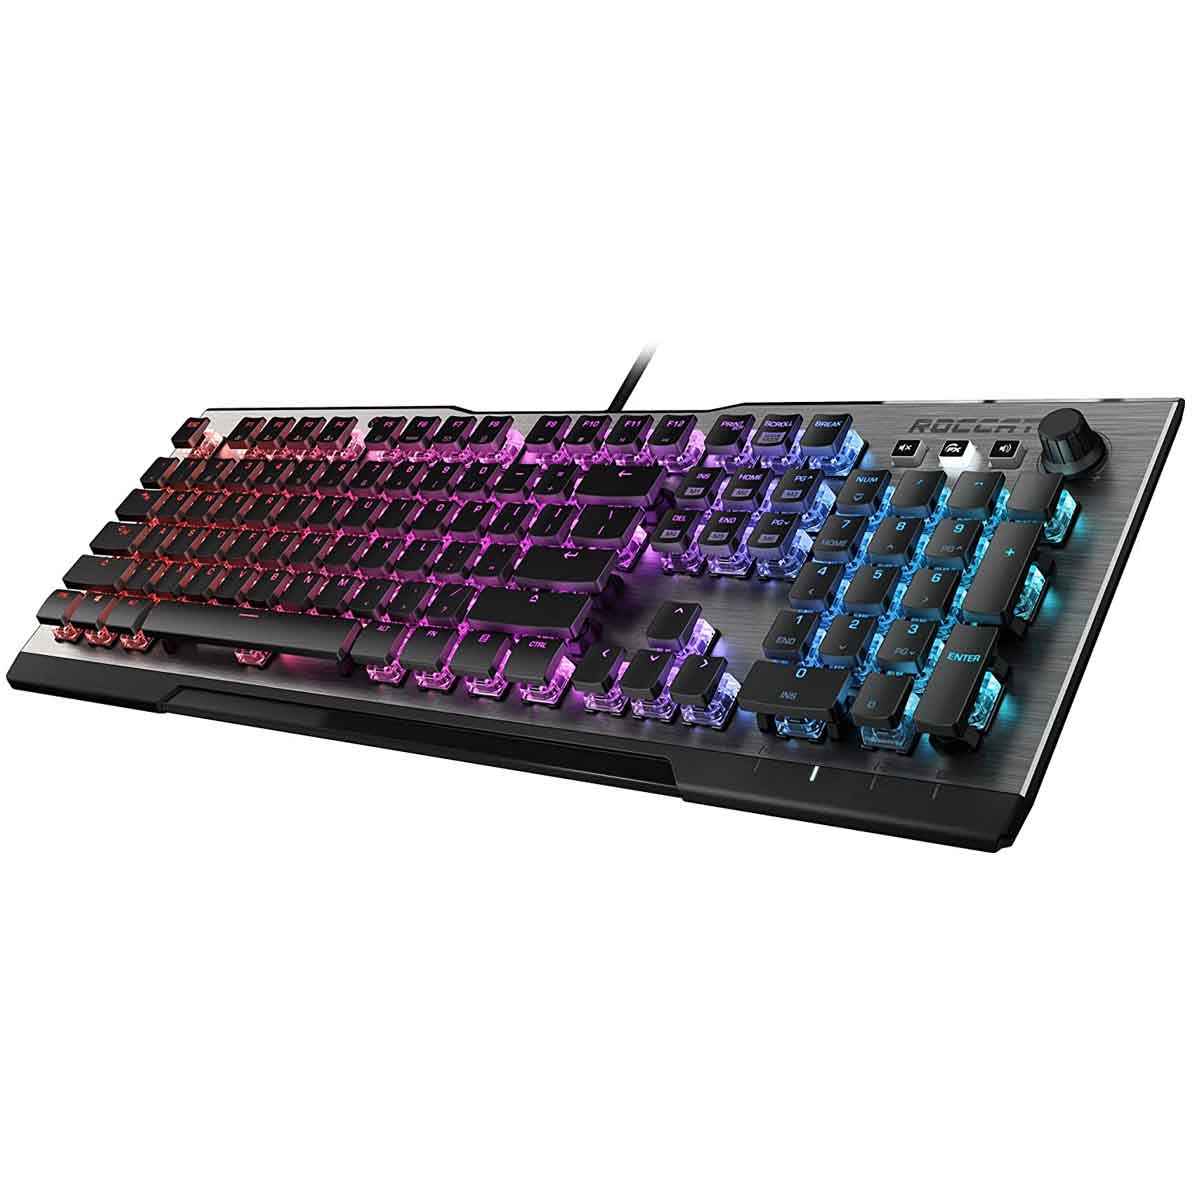 Roccat Vulcan 100 Aimo Gaming Keyboard Pc Components Price In India Specification Features Digit In